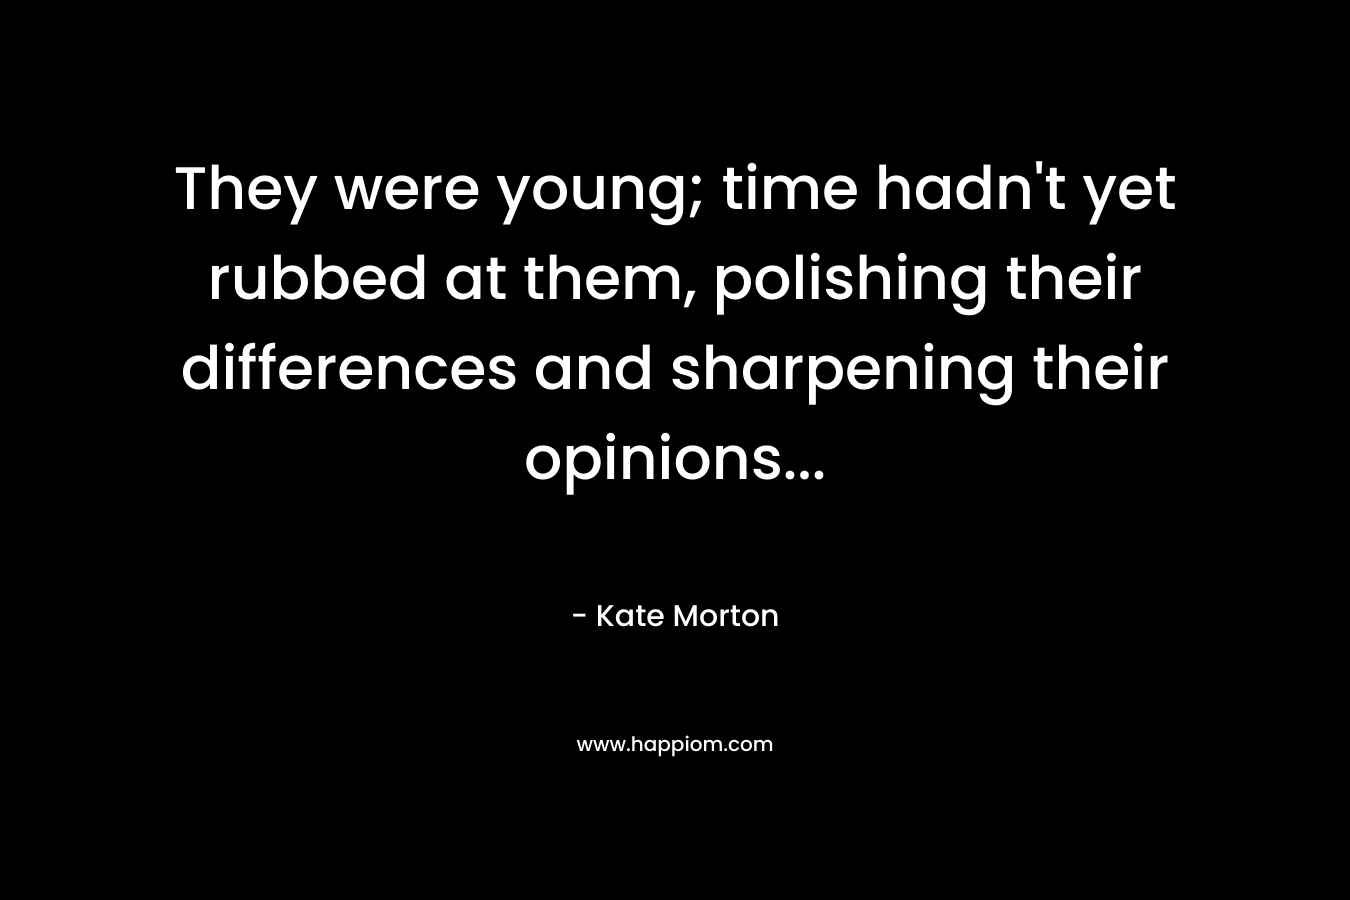 They were young; time hadn't yet rubbed at them, polishing their differences and sharpening their opinions...